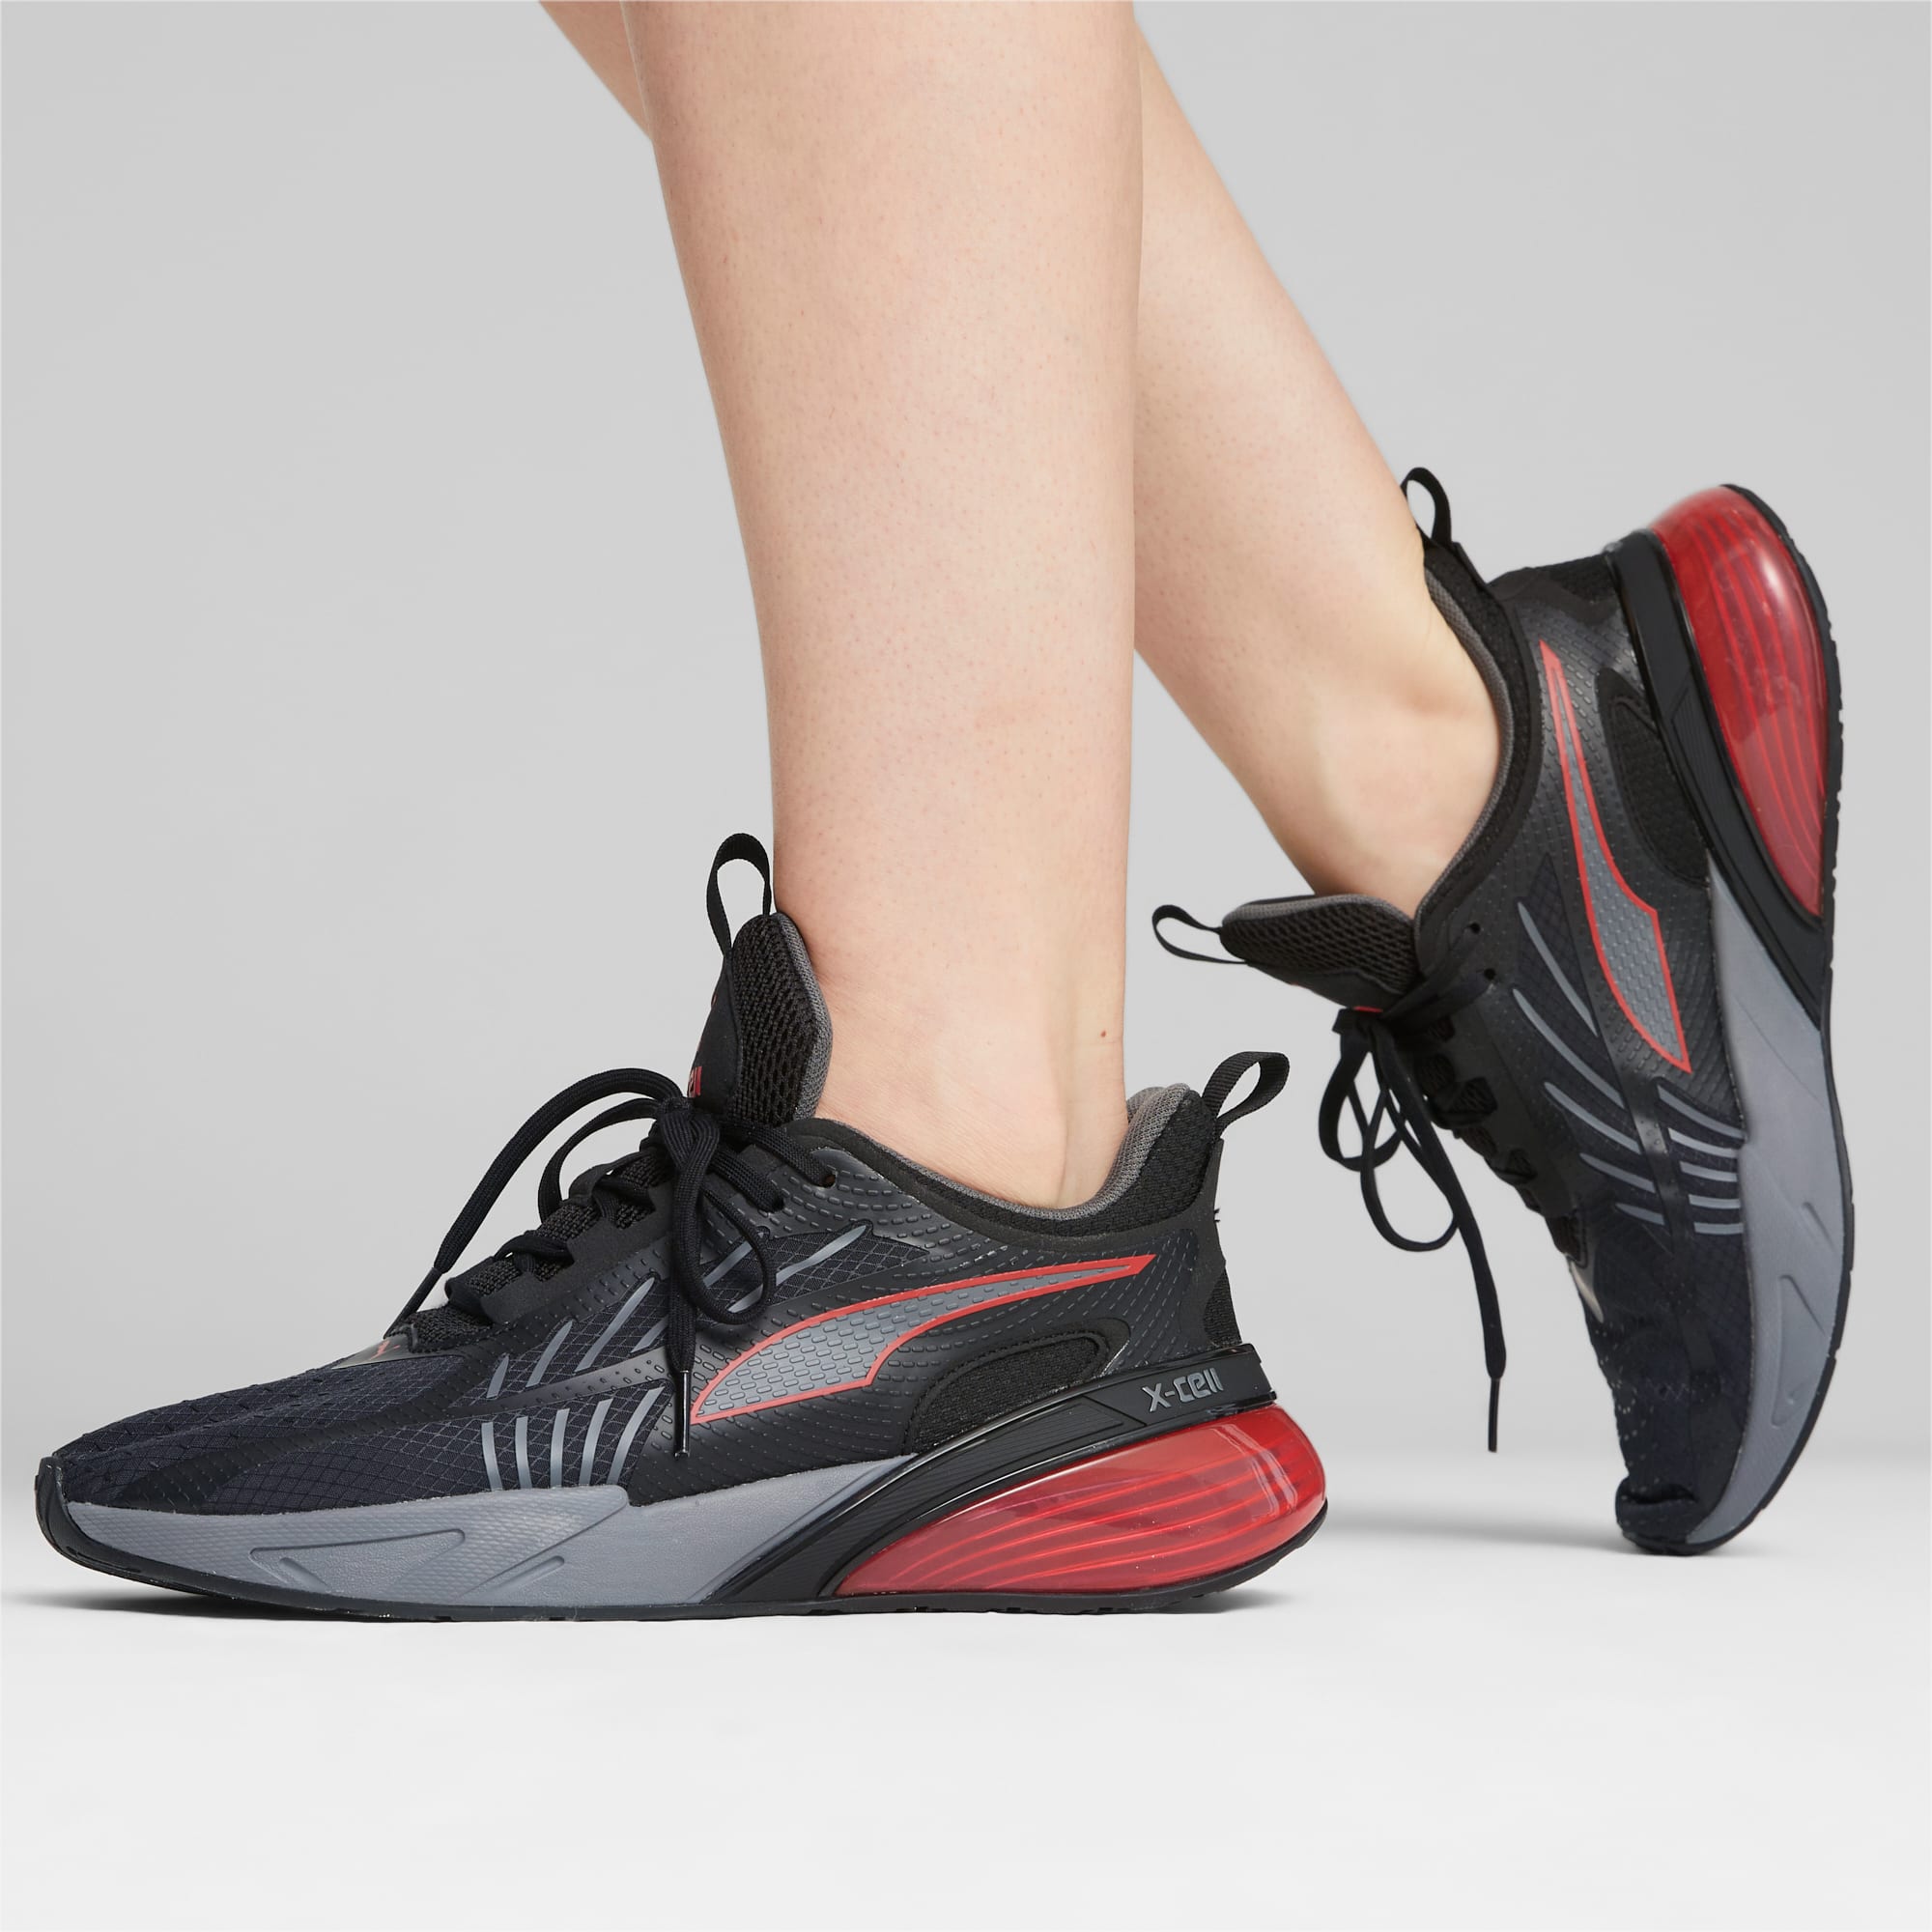 Tenis Puma X-Cell Action Hombre Negro Cafe